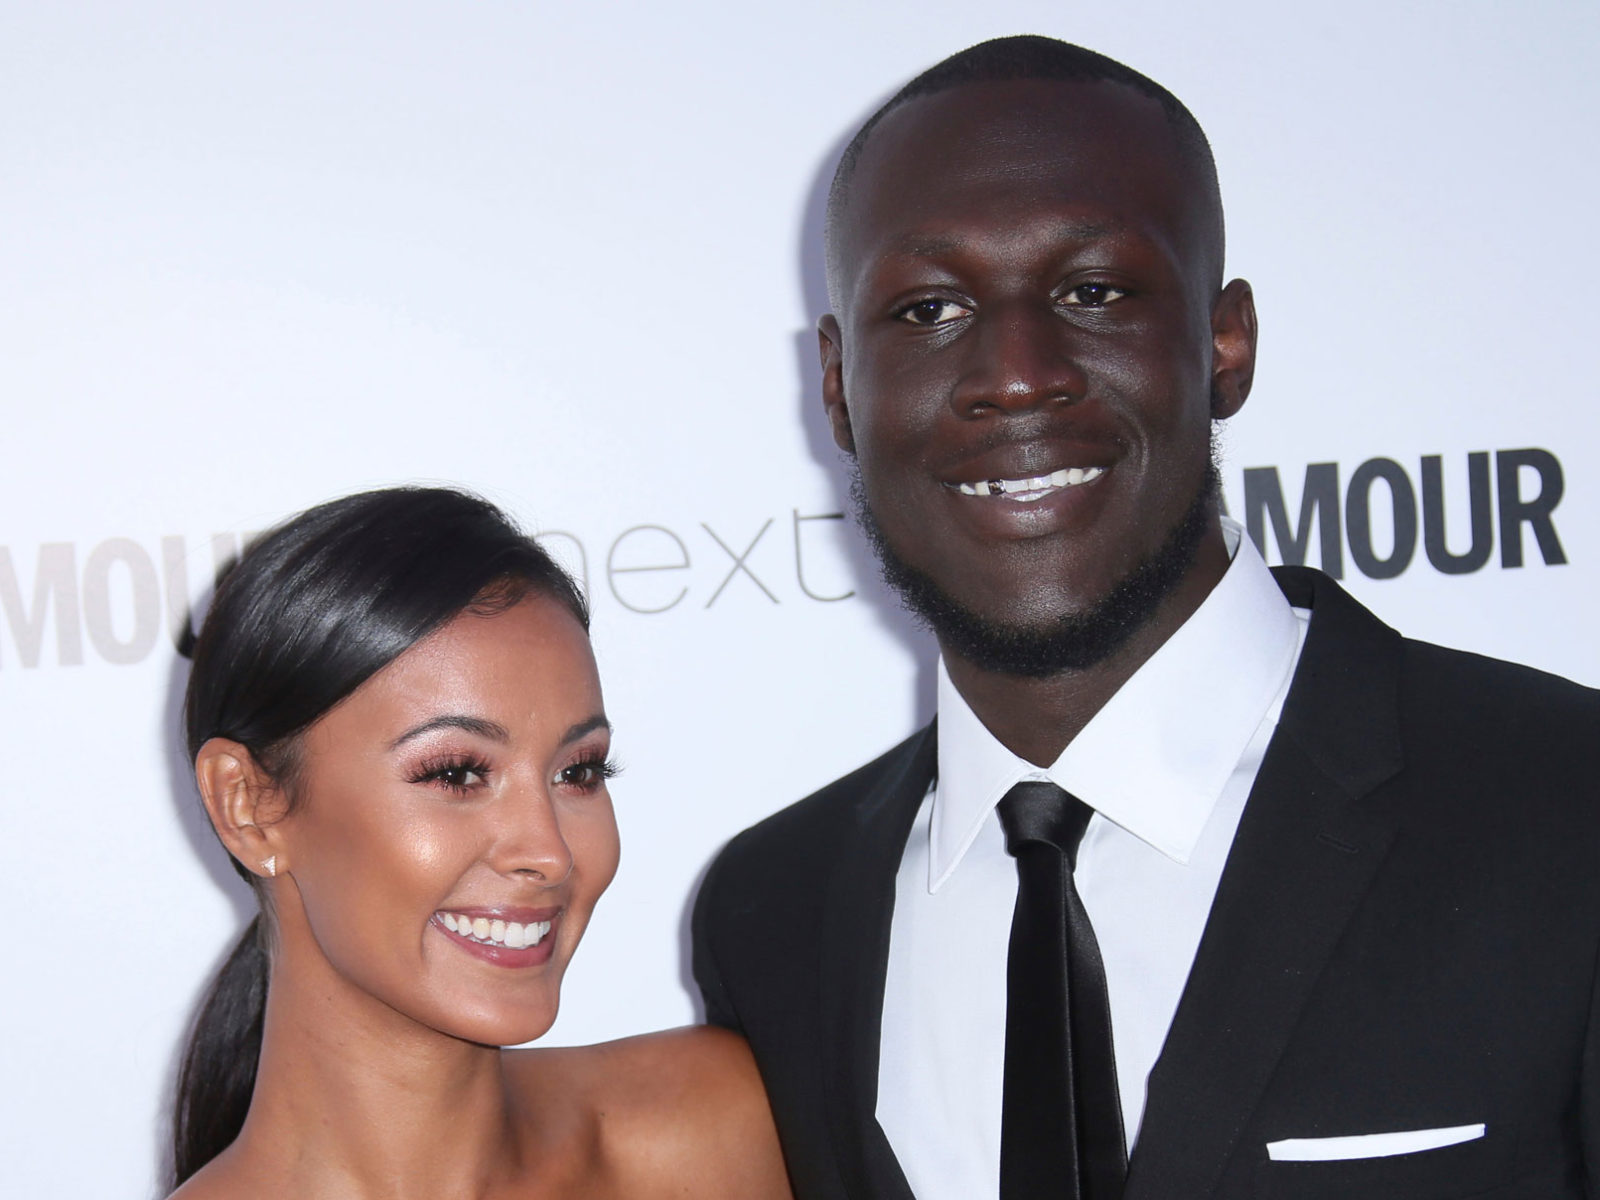 Maya Jama and Stormzy on the red carpet smiling